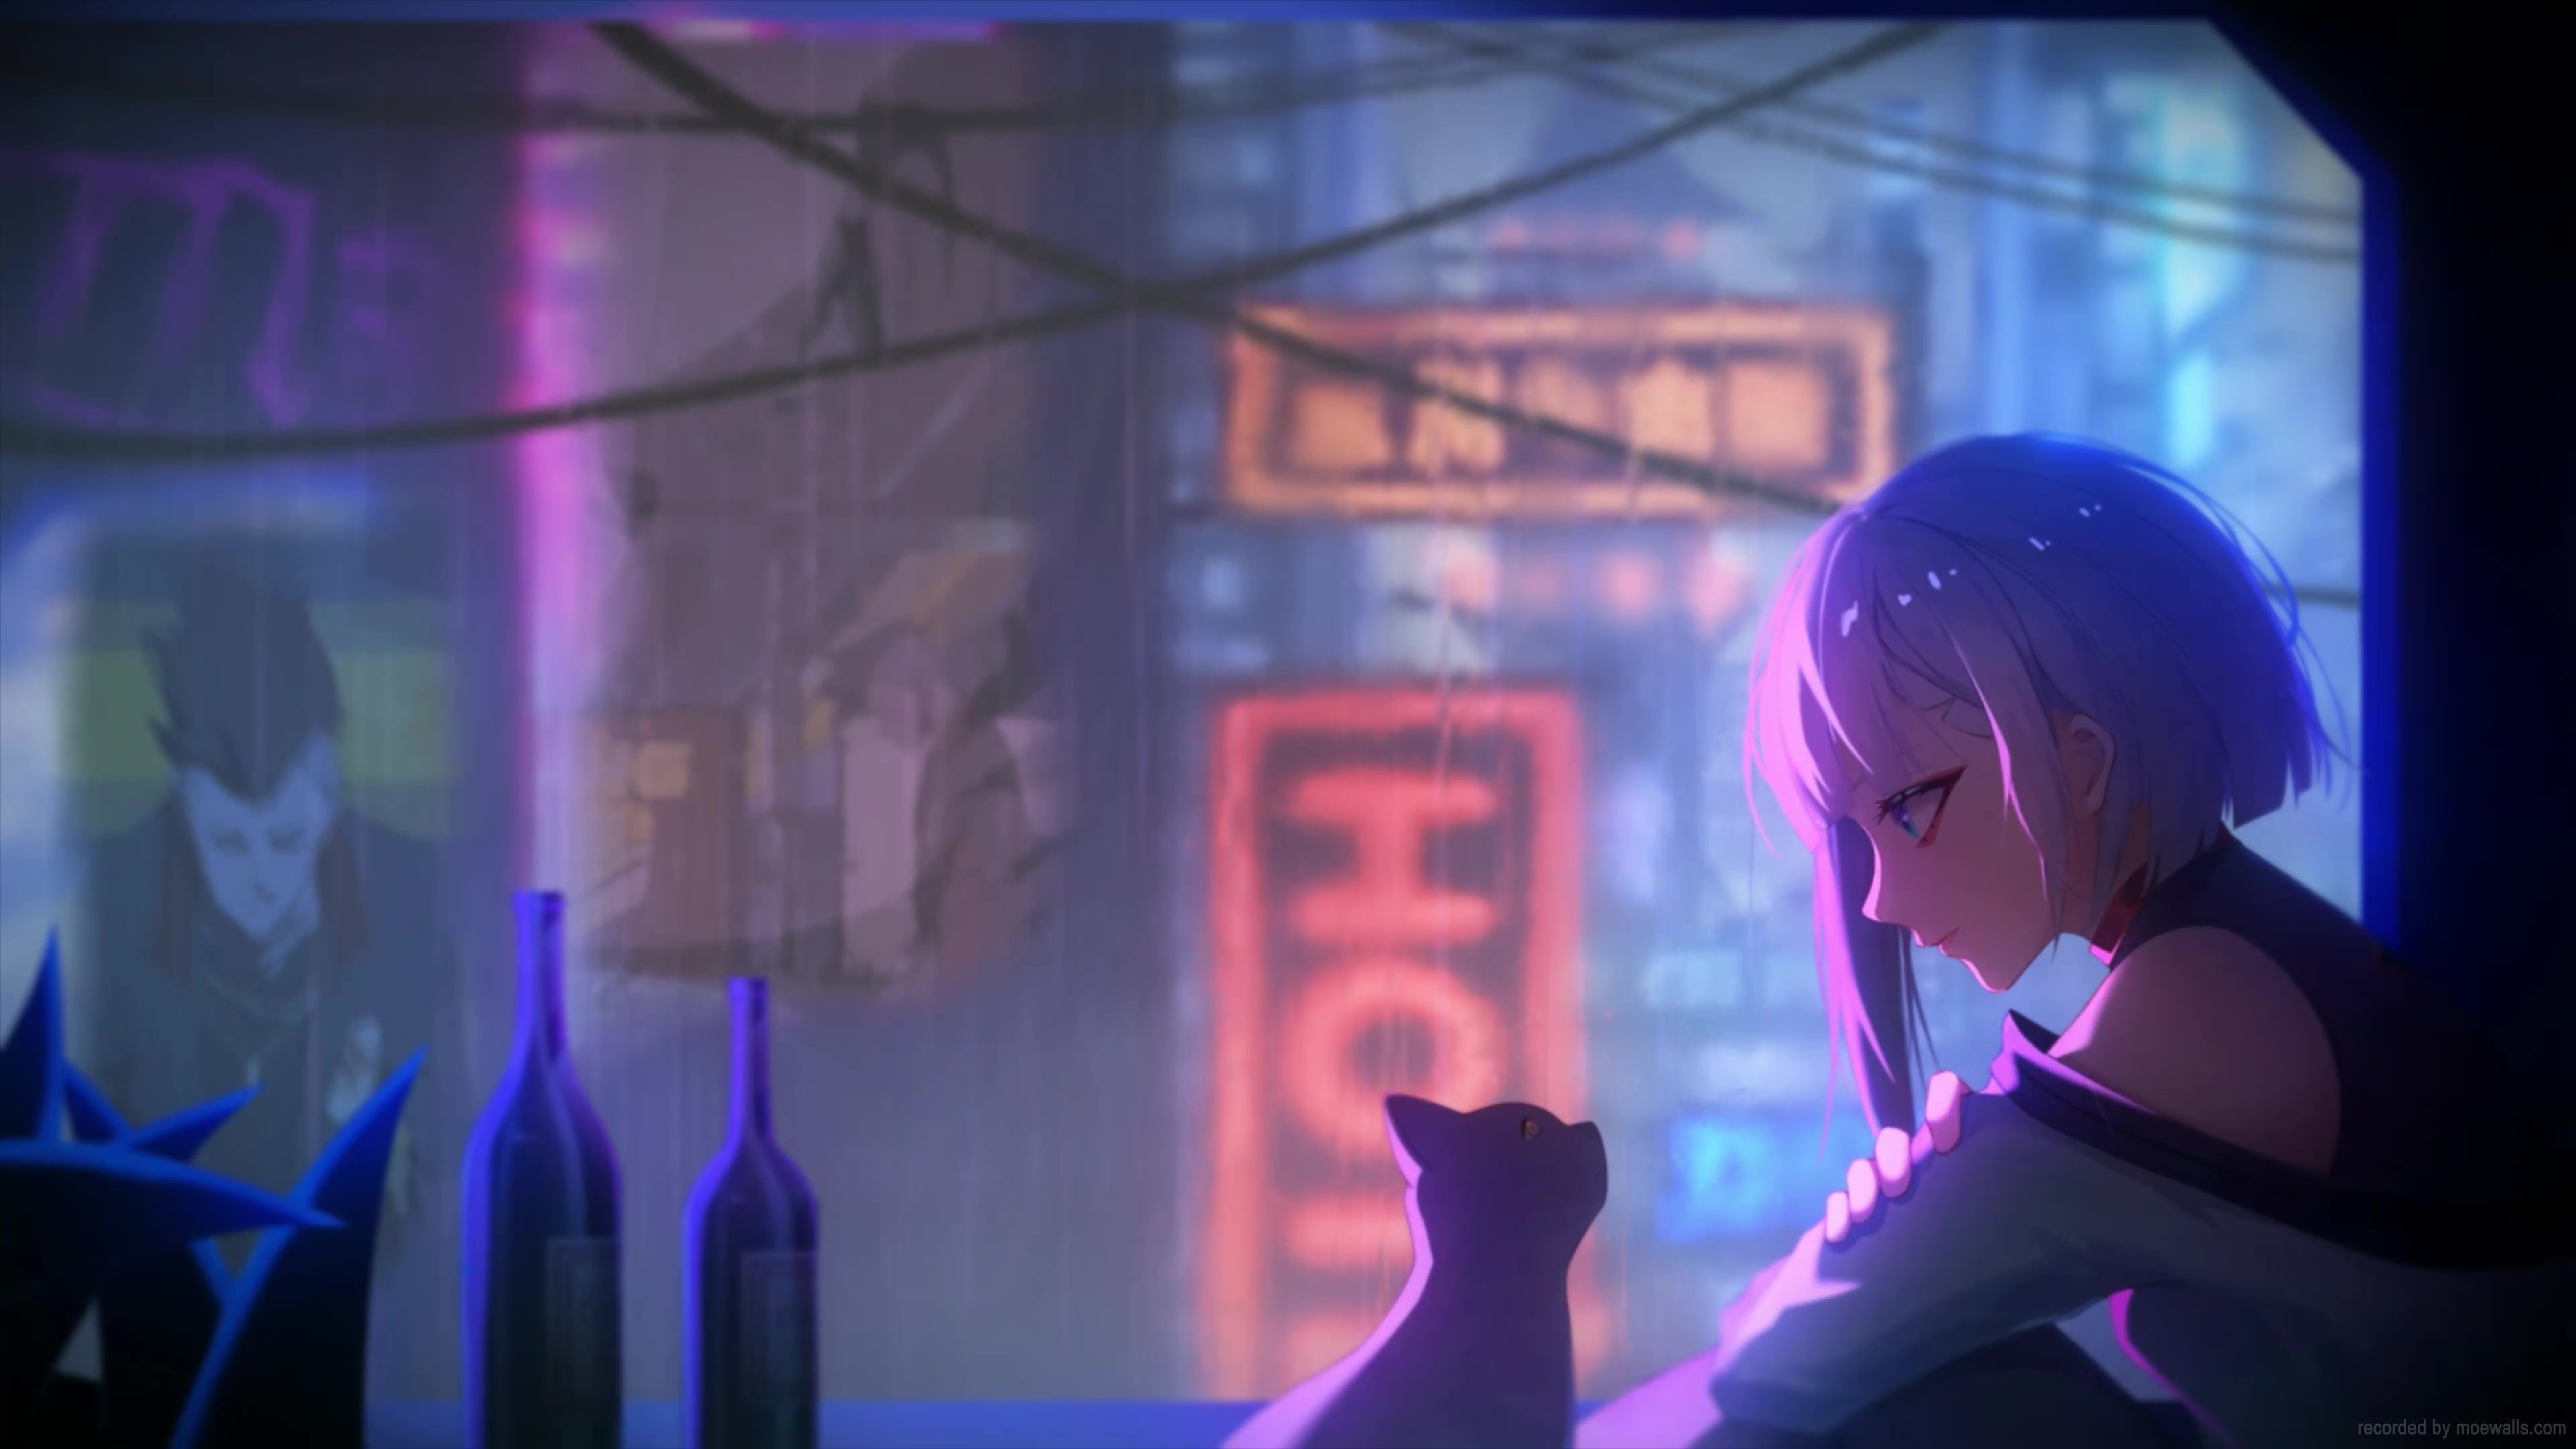 Download Live Wallpaper Lucyna And Cat In A Rainy Night - Cyberpunk for Des...